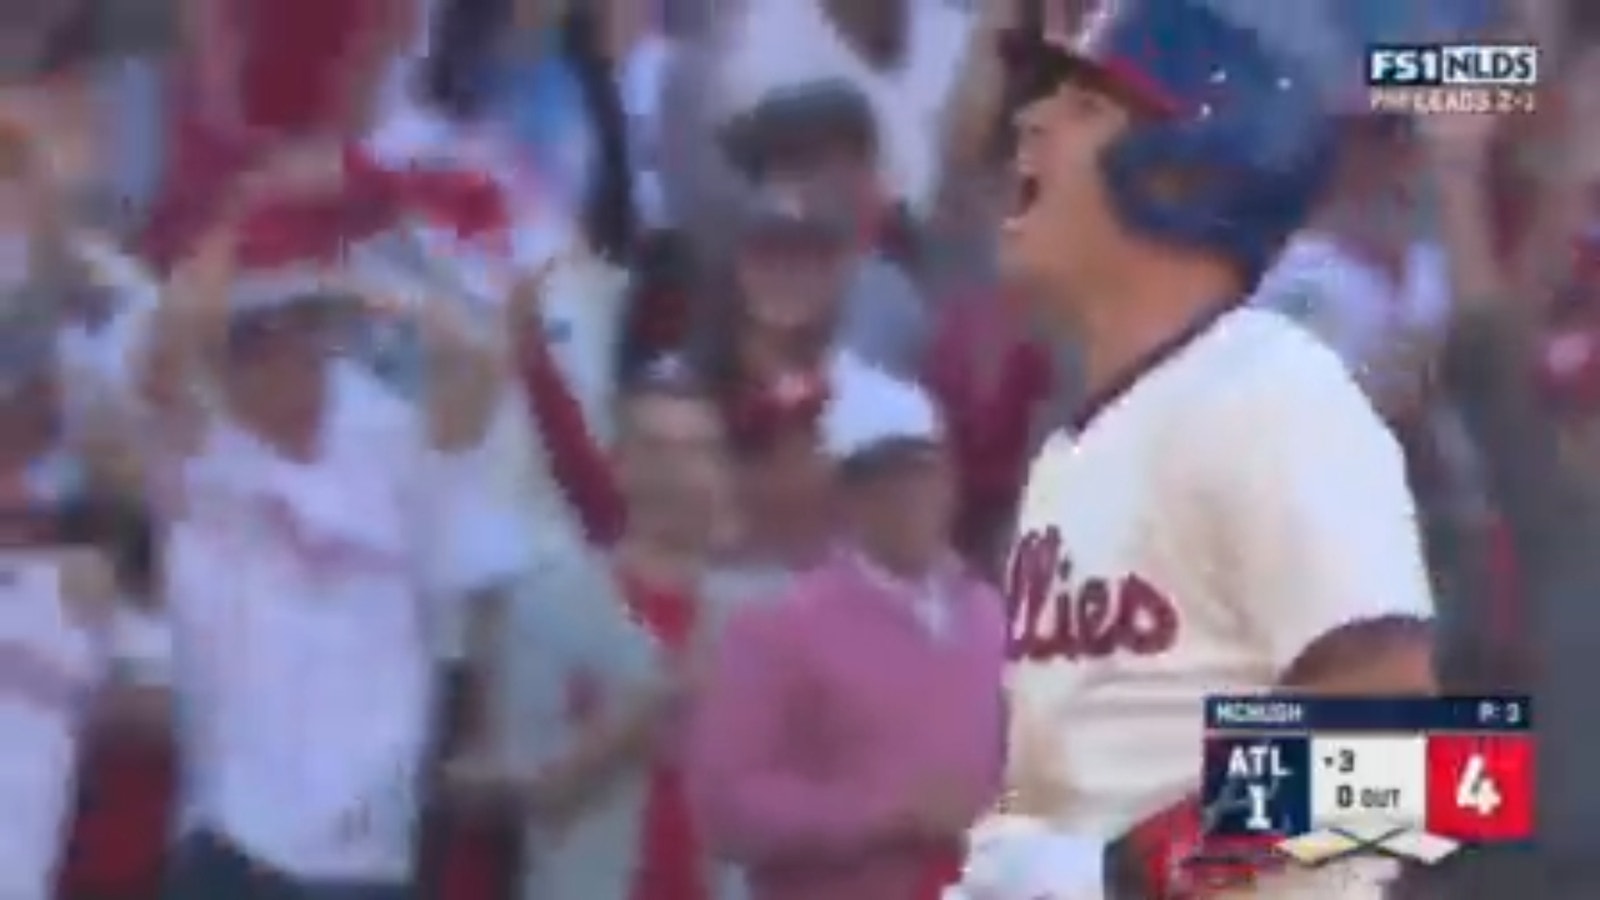 J.T. Realmuto hits an inside-the-park home run to give Phillies a 4-1 lead